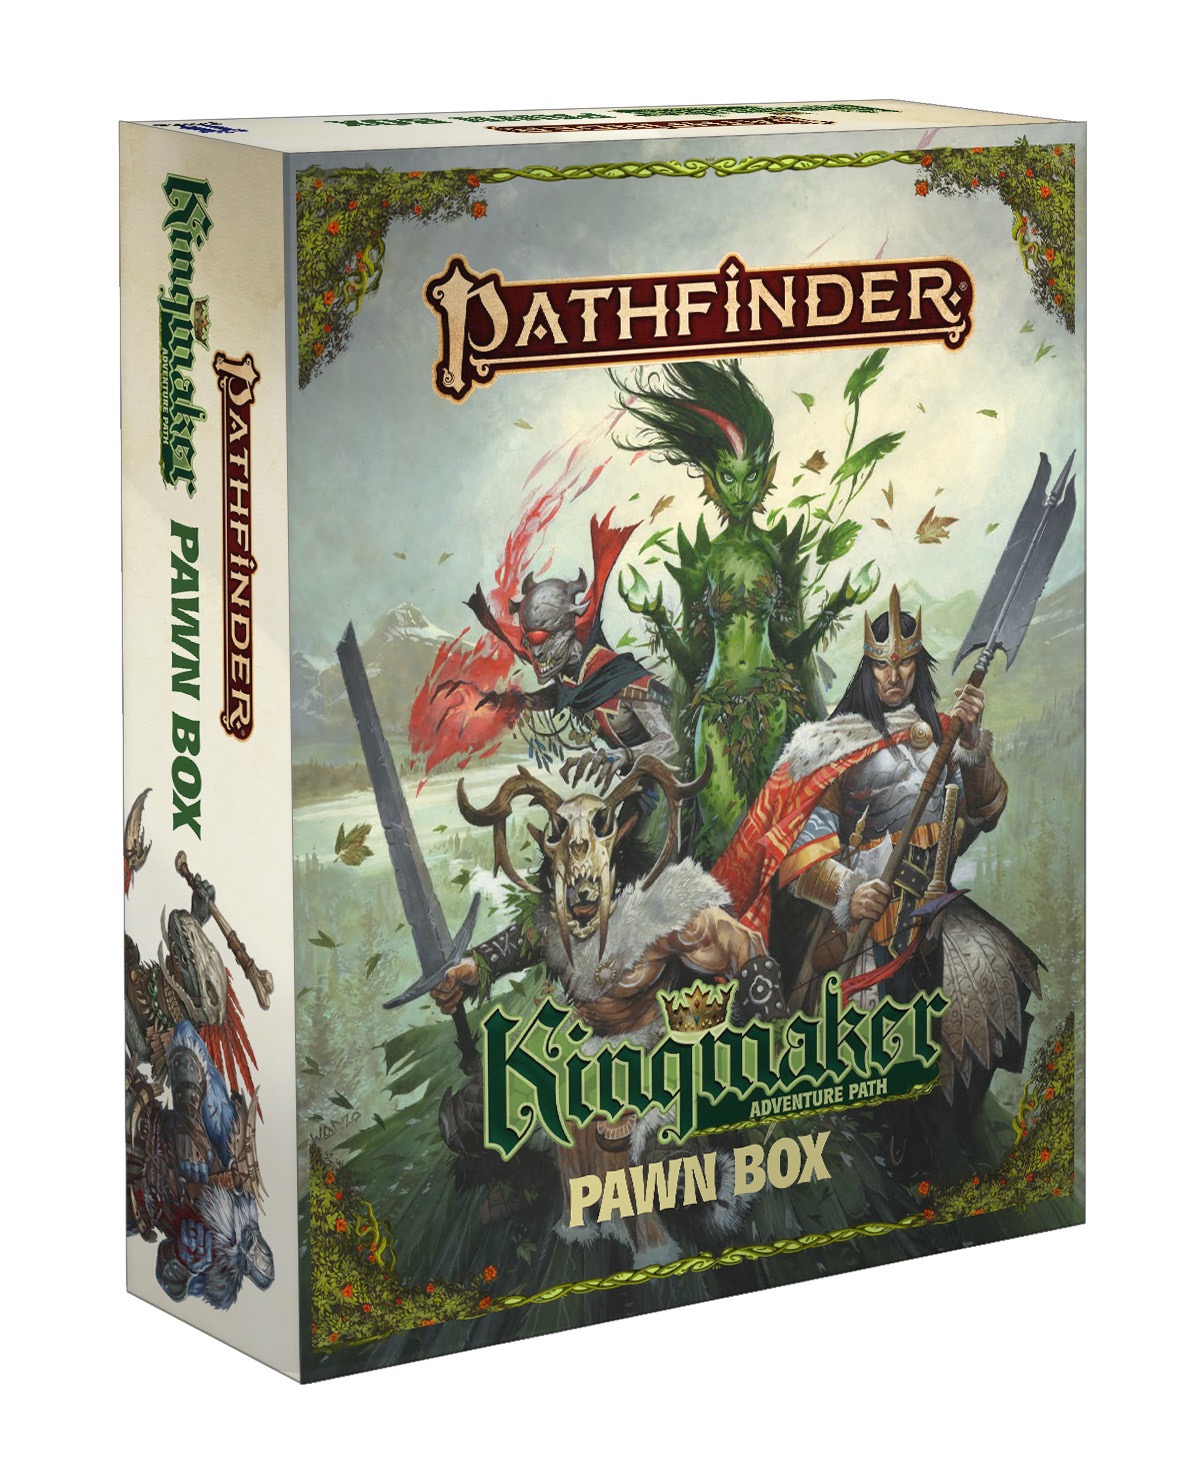 Pathfinder - Pathfinder: Kingmaker Builds and Strats Thread, Page 180